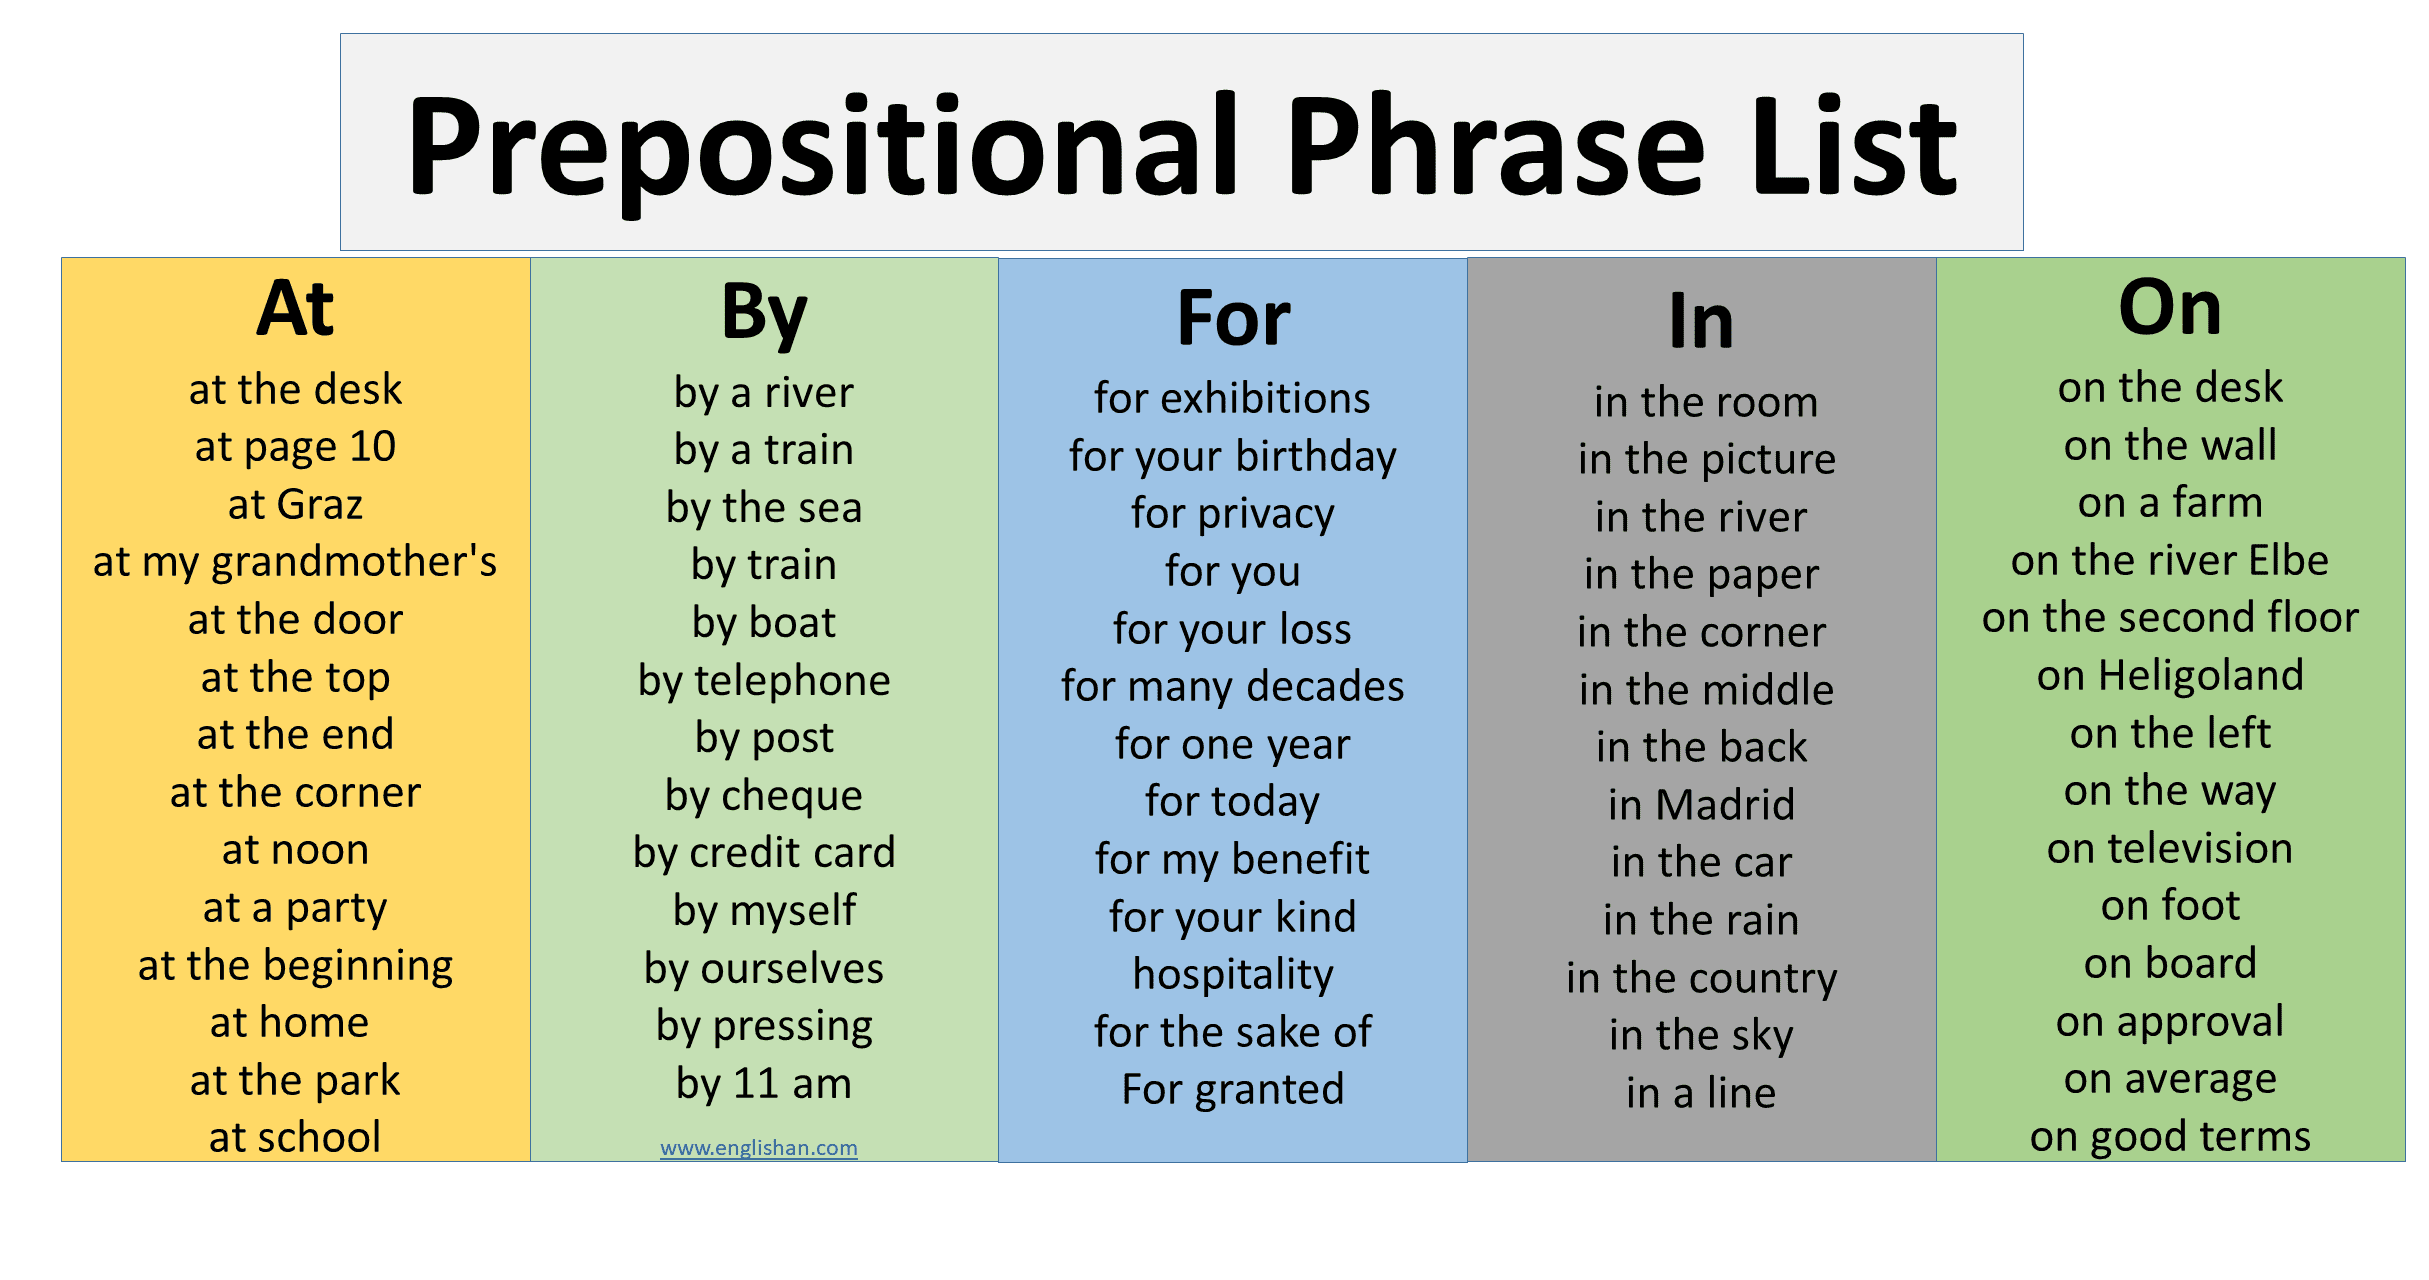 list-of-prepositions-phrases-in-english-with-useful-examples